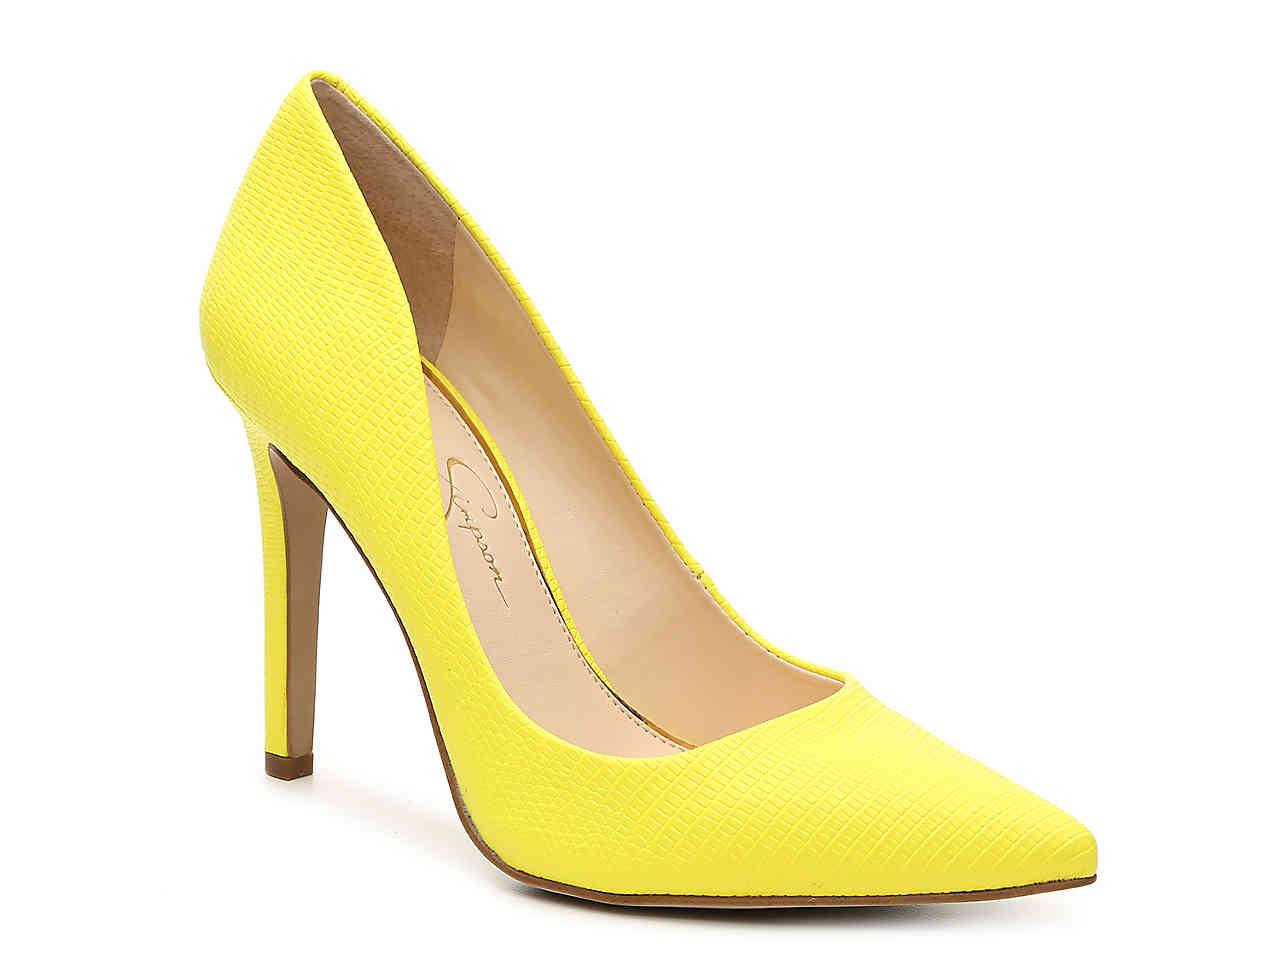 Jessica Simpson Cassani Pumps in Yellow | Lyst